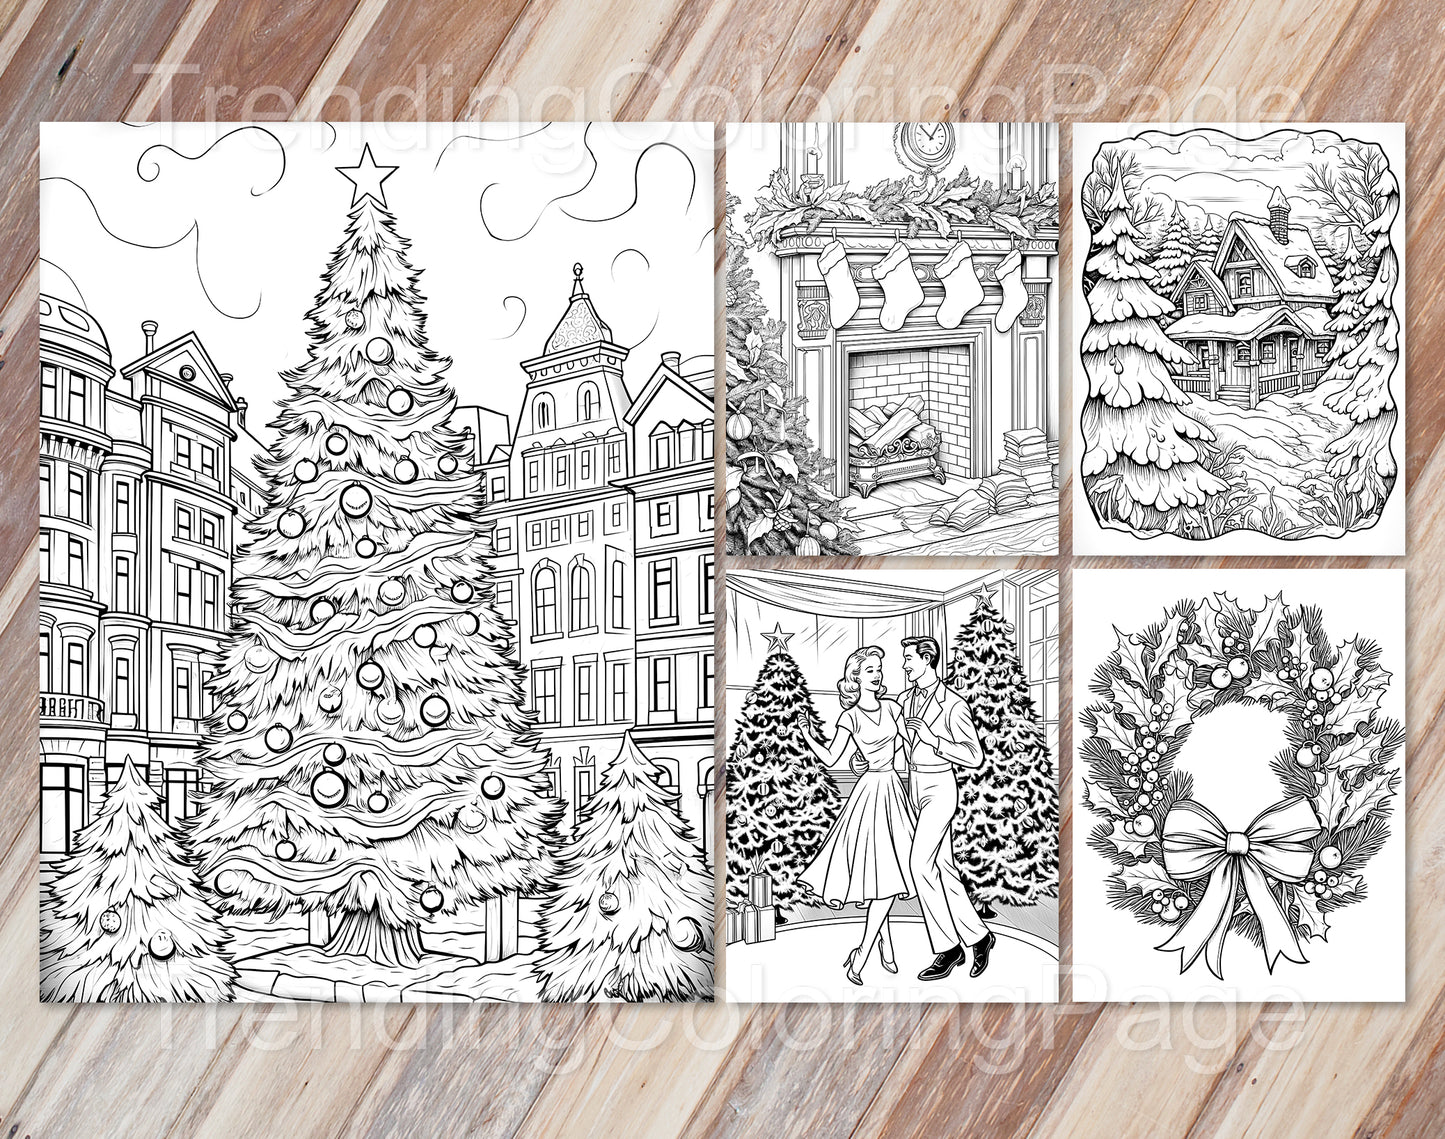 50 Vintage Christmas Coloring Pages - Instant Download - Printable PDF